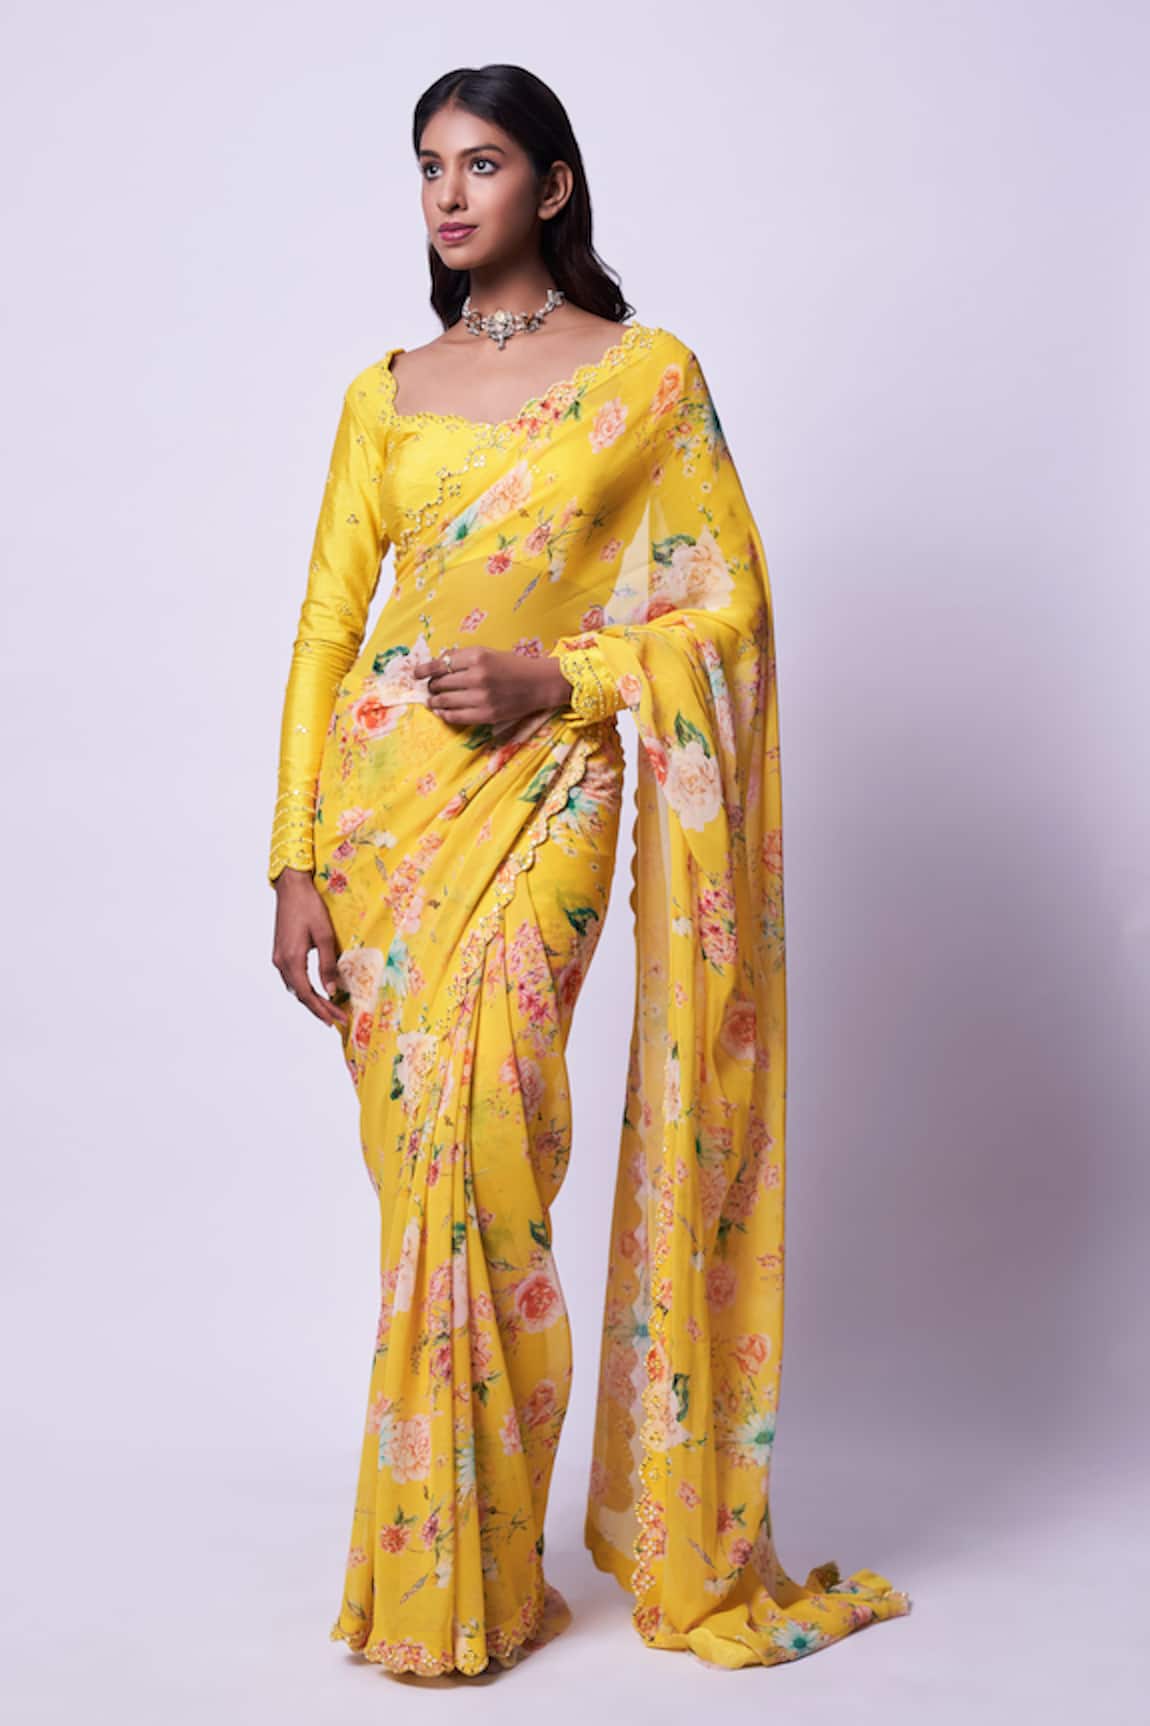 Kavitha Gutta Floral Pattern Embroidered Saree With Blouse